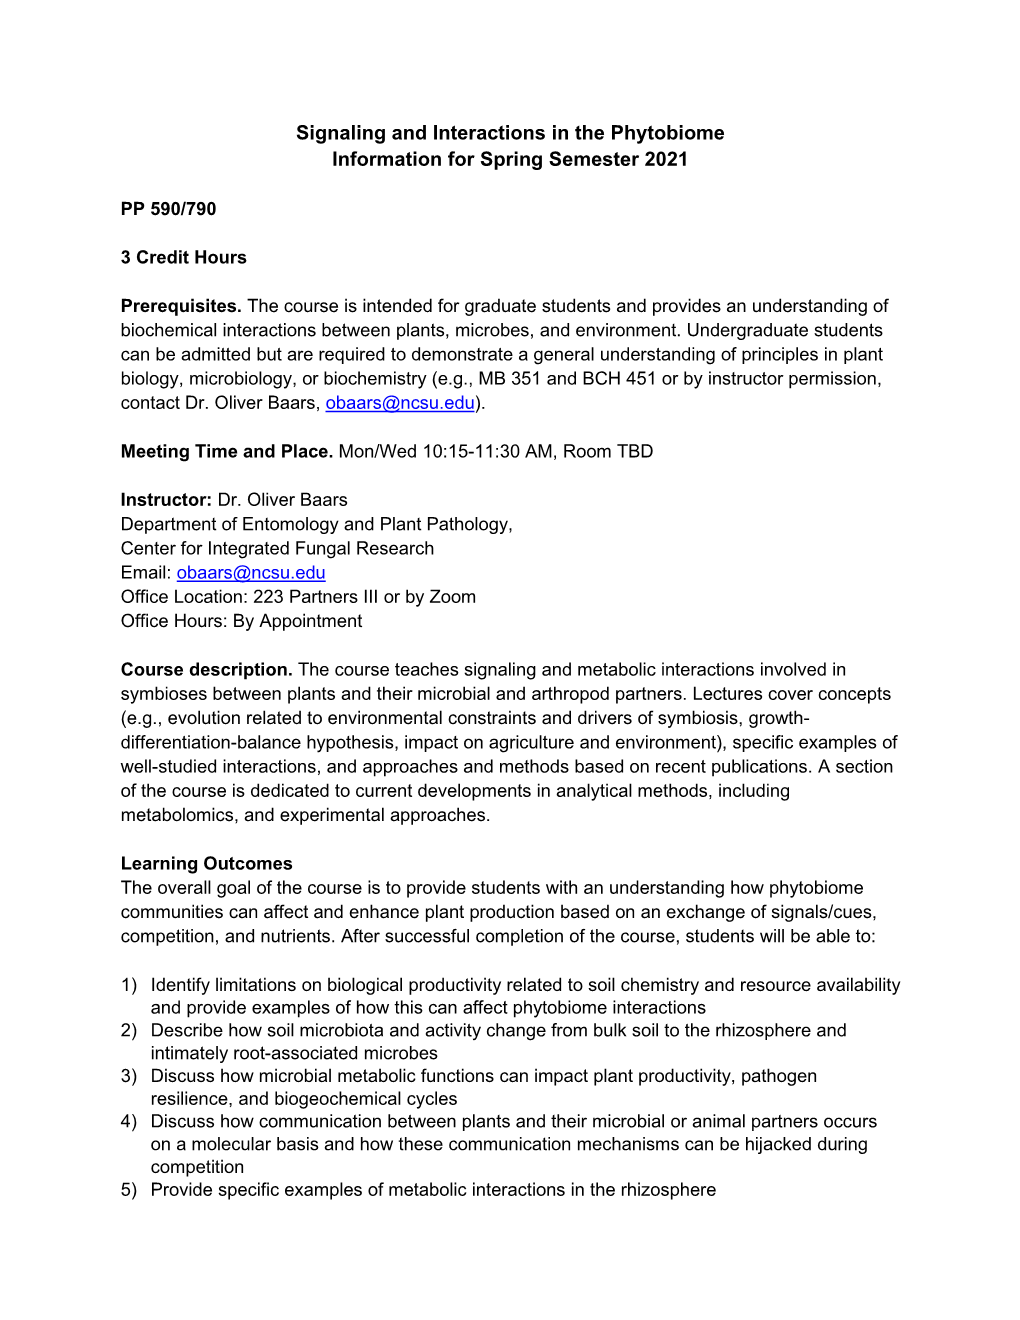 Signaling and Interactions in the Phytobiome Information for Spring Semester 2021